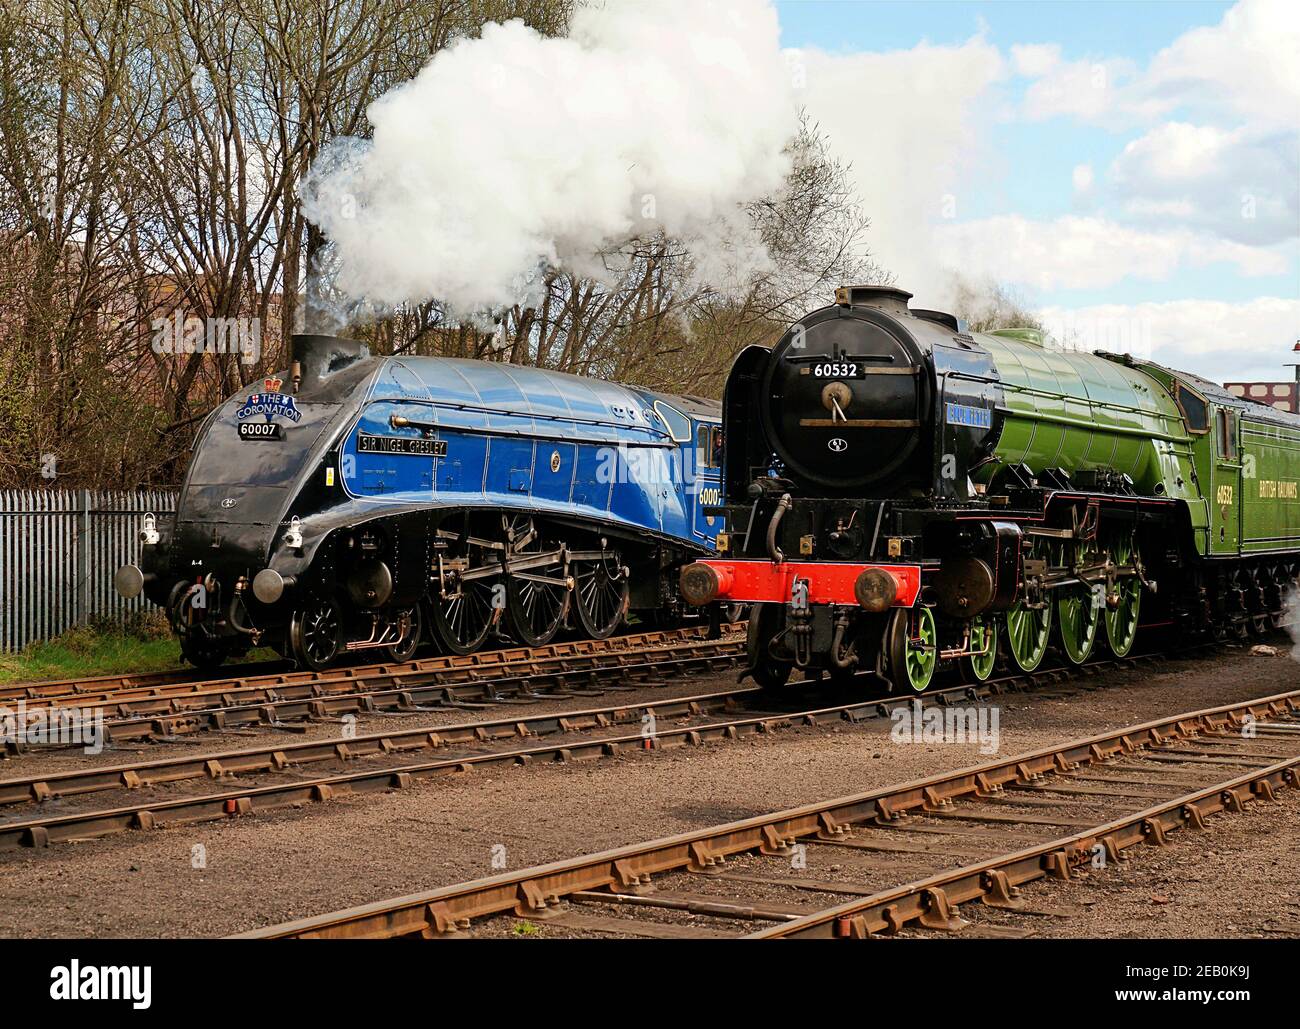 LNER Giants of Steam A4 Pacific Locomotive 60007 Sir Nigel Gresley und A2 Pacific 60532 Blue Peter in Barrow Hill 2009 Stockfoto